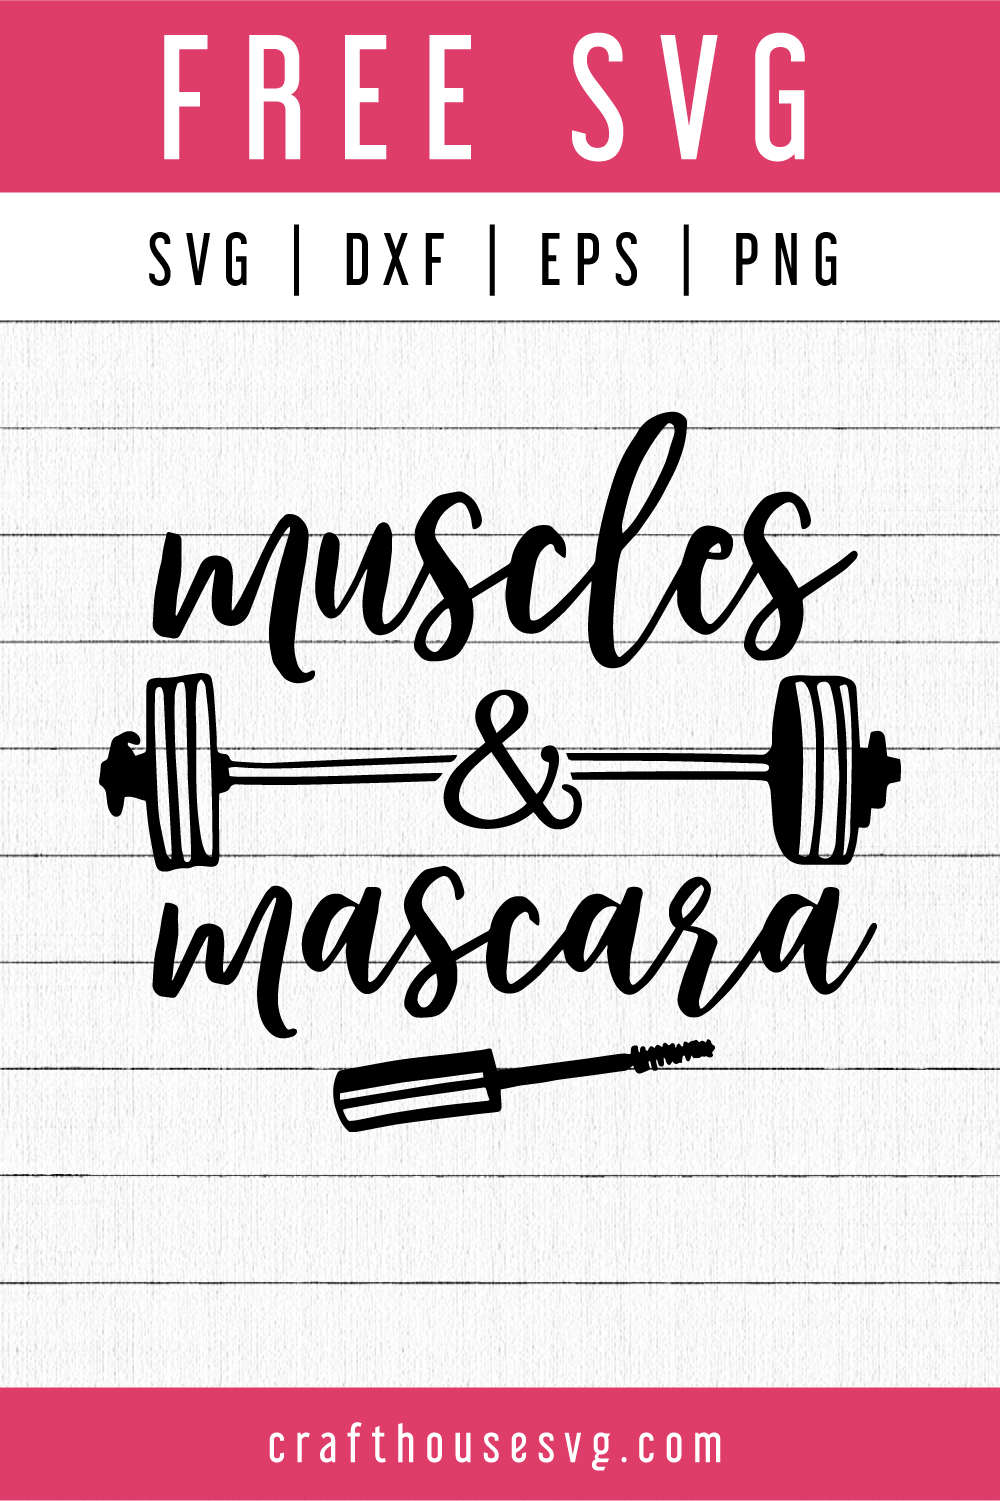 FREE Muscles and mascara SVG | FB124 Craft House SVG - SVG files for Cricut and Silhouette